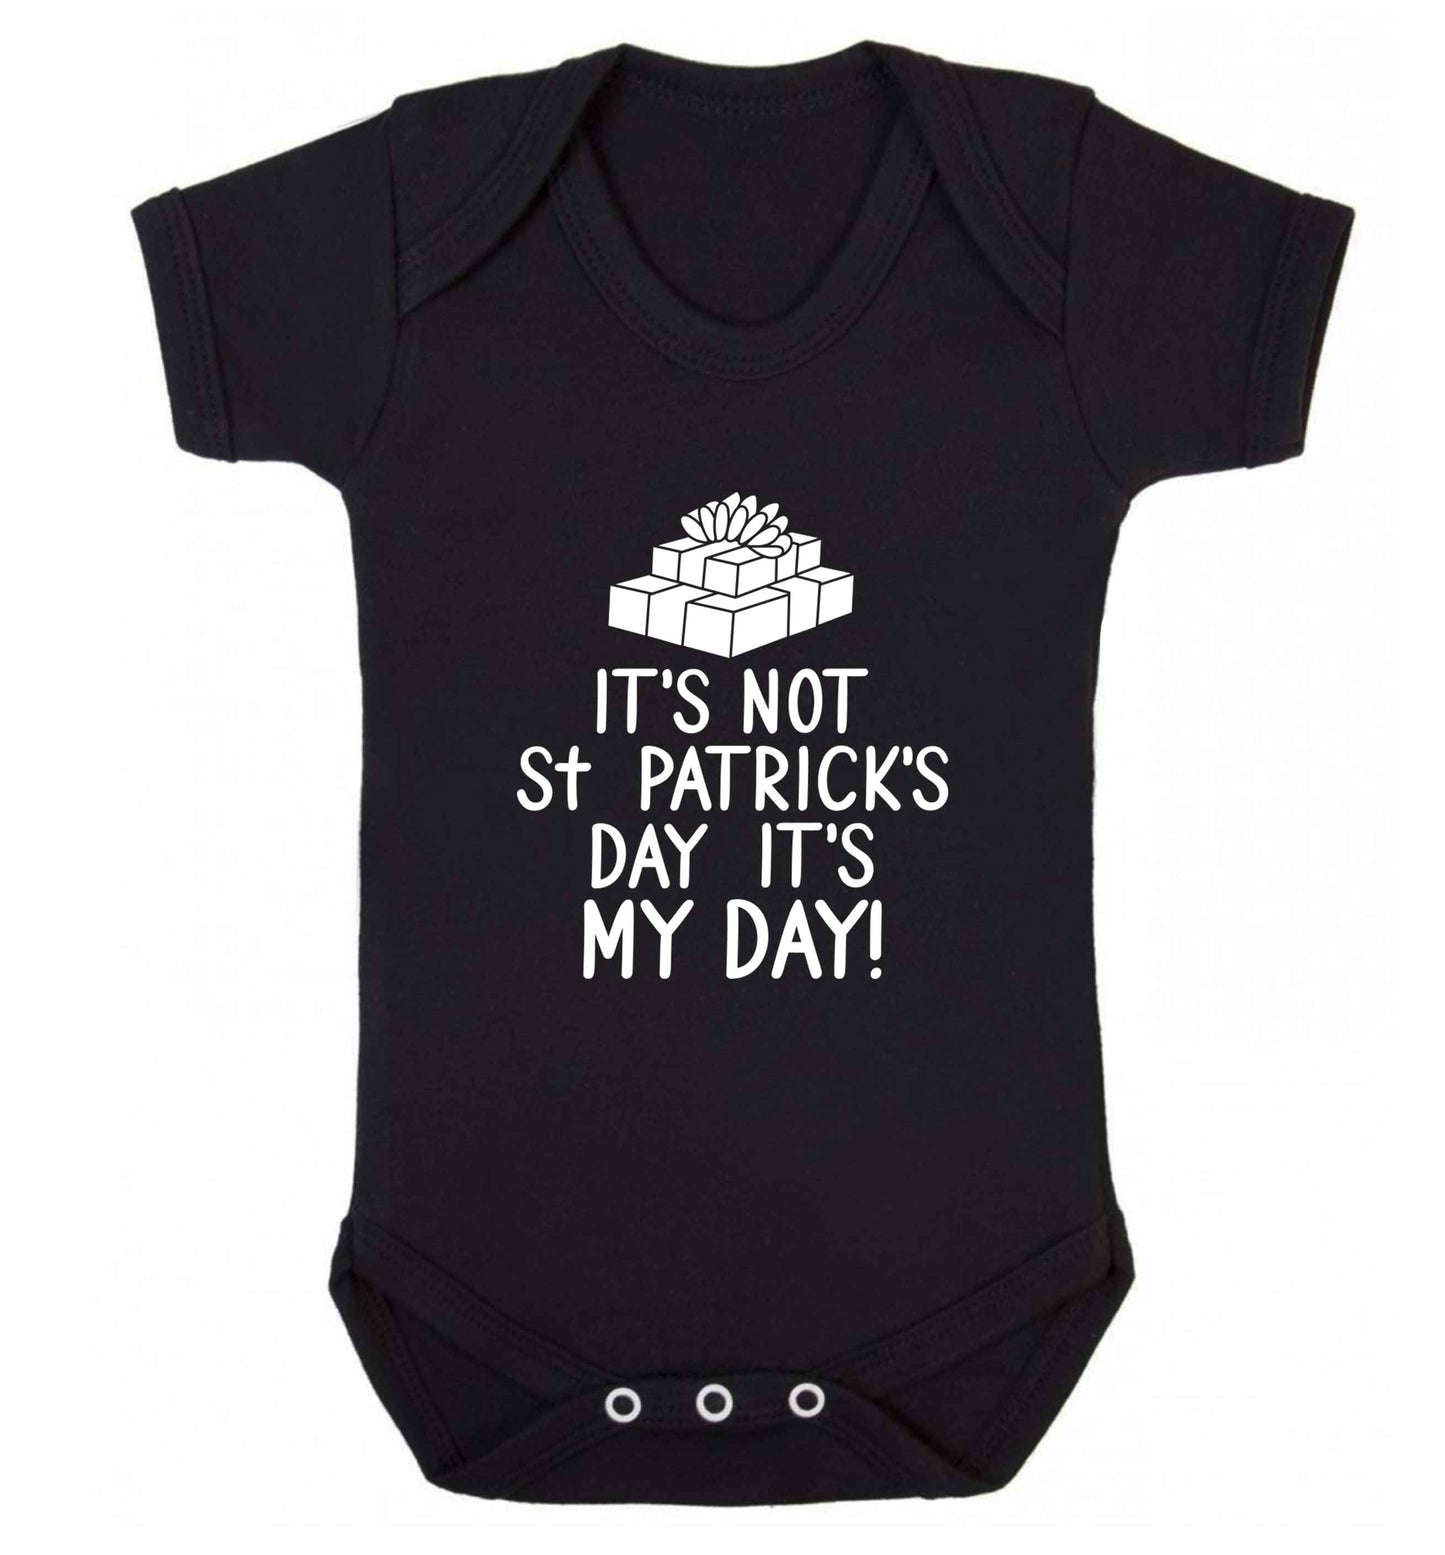 Funny gifts for your mum on mother's dayor her birthday! It's not St Patricks day it's my day baby vest black 18-24 months